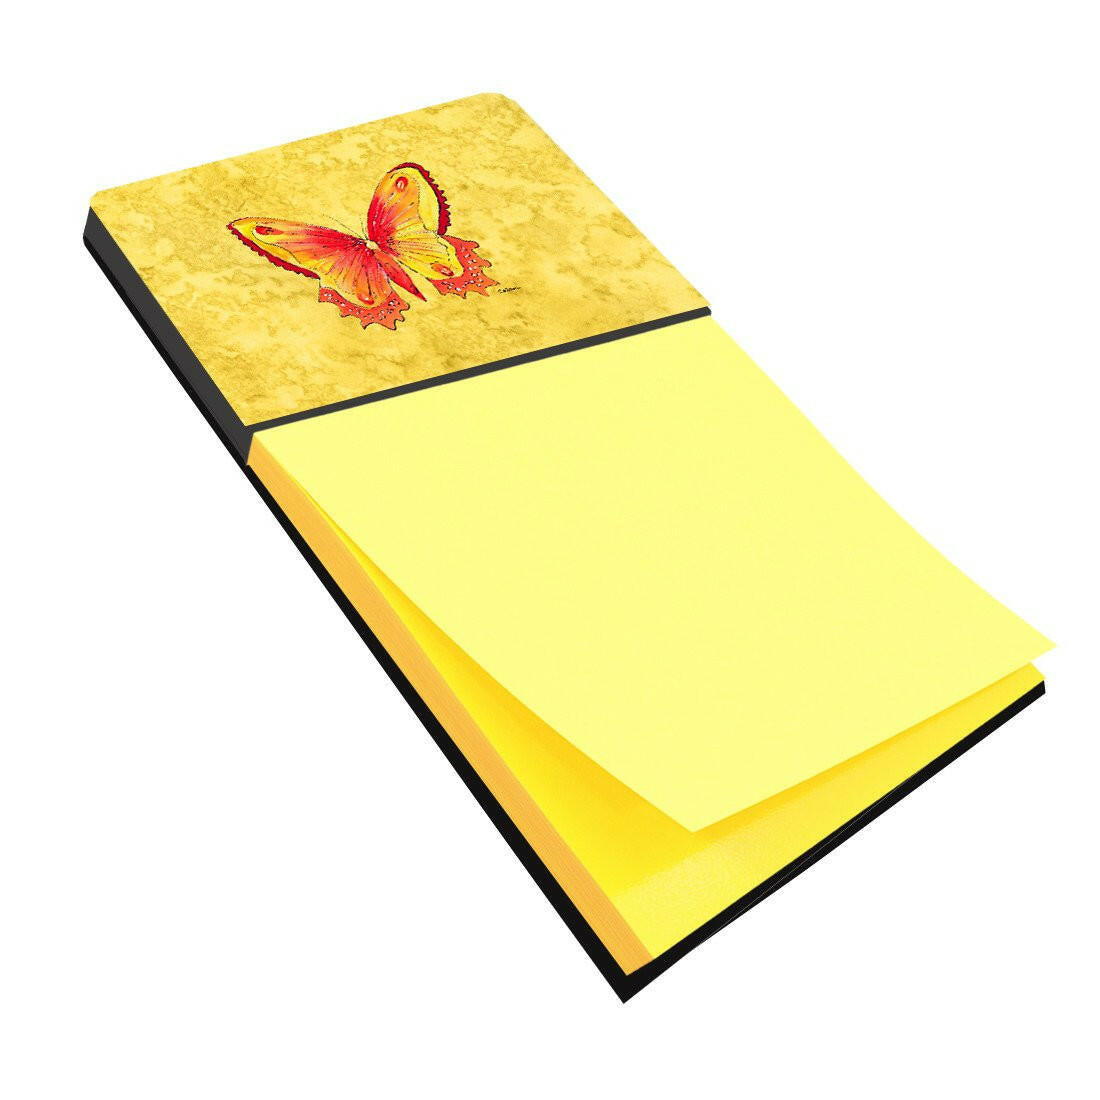 Butterfly on Yellow Refiillable Sticky Note Holder or Postit Note Dispenser 8857SN by Caroline's Treasures